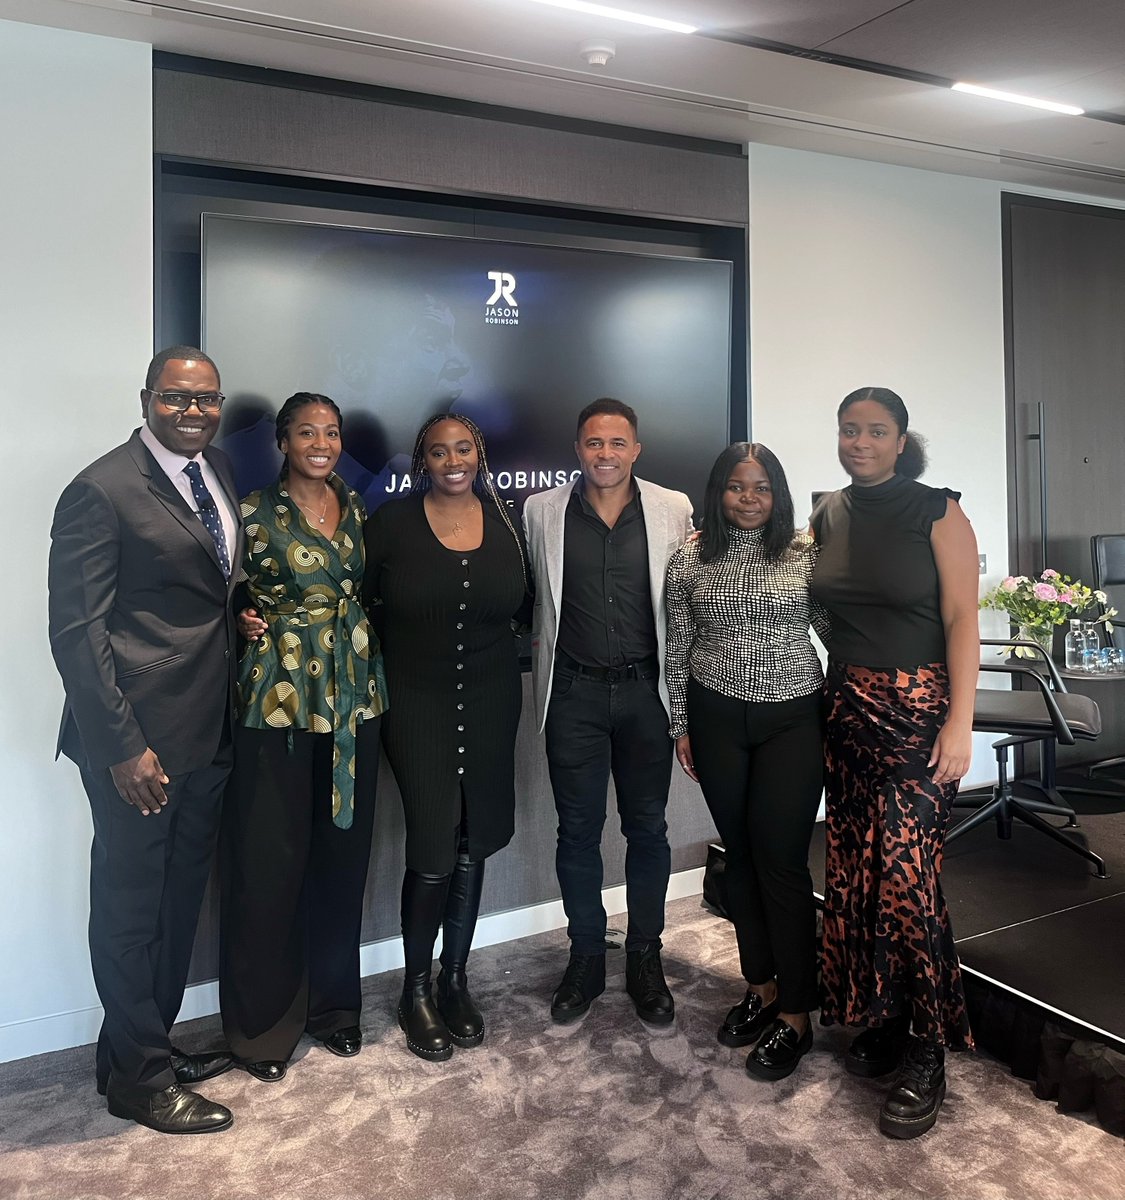 Our @TravelersEurope Black Employees & Allies Network celebrated Black History Month with speaker, Jason Robinson OBE, the first Black man to captain the England rugby union team. He spoke about the defining moments of his life and career. Learn more: travl.rs/3McAJAL